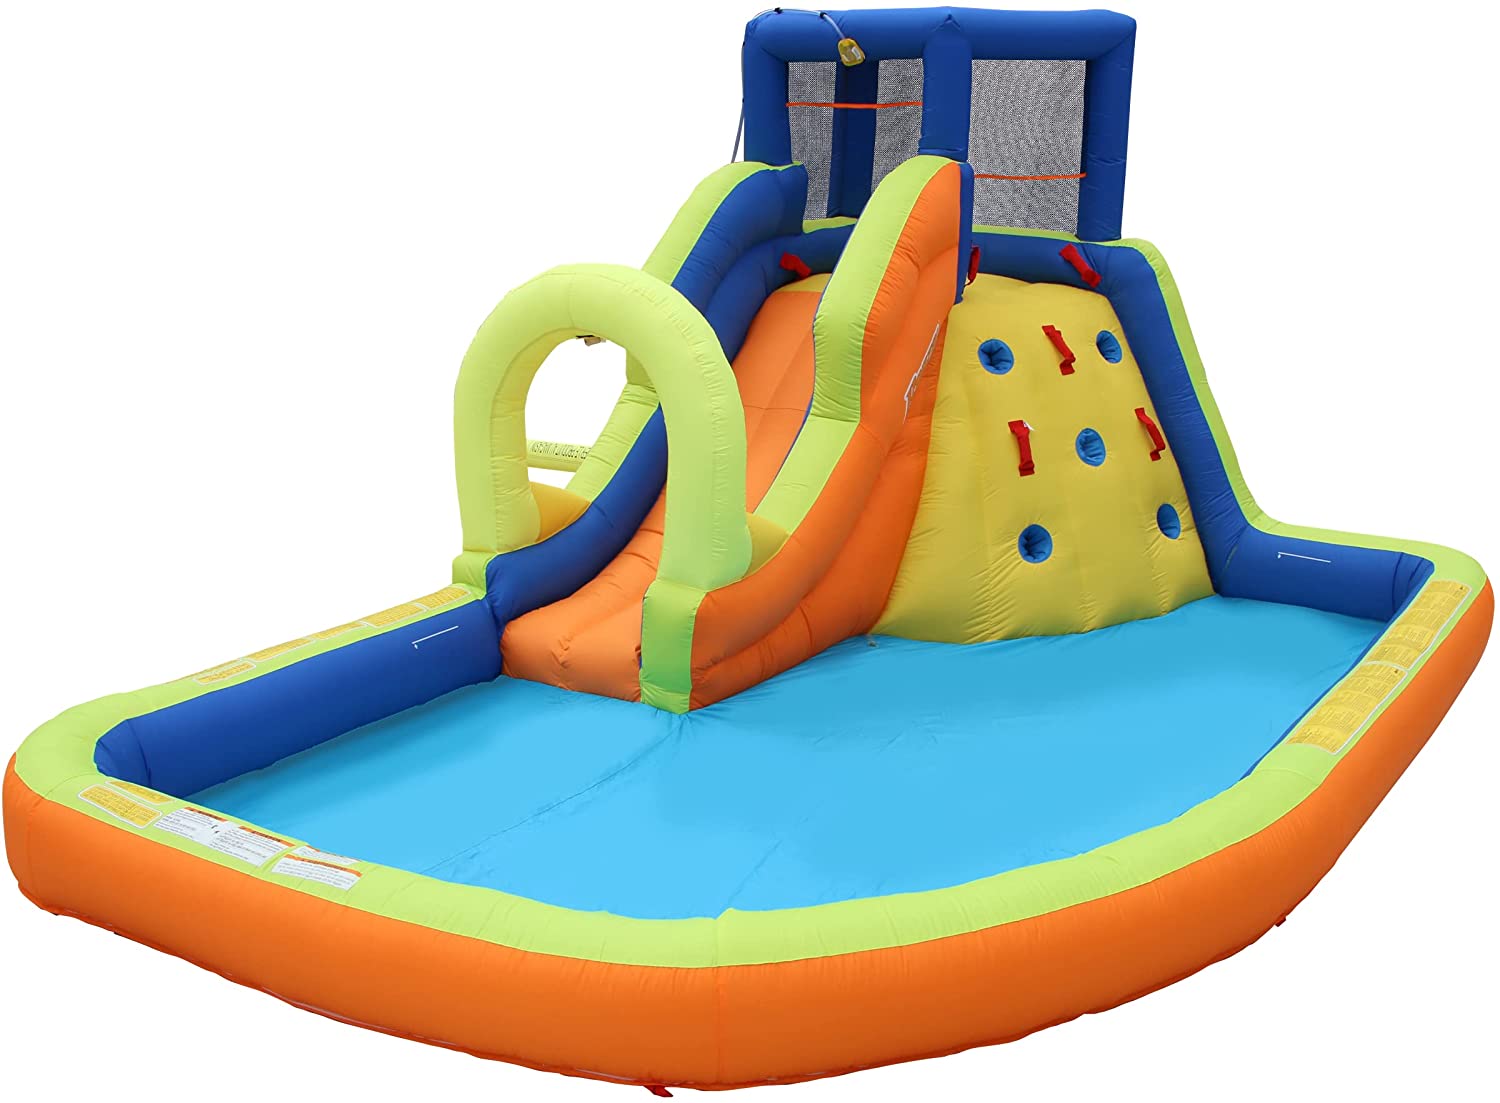 BANZAI 29310A Splash Summit Inflatable Water Park Multicolor New